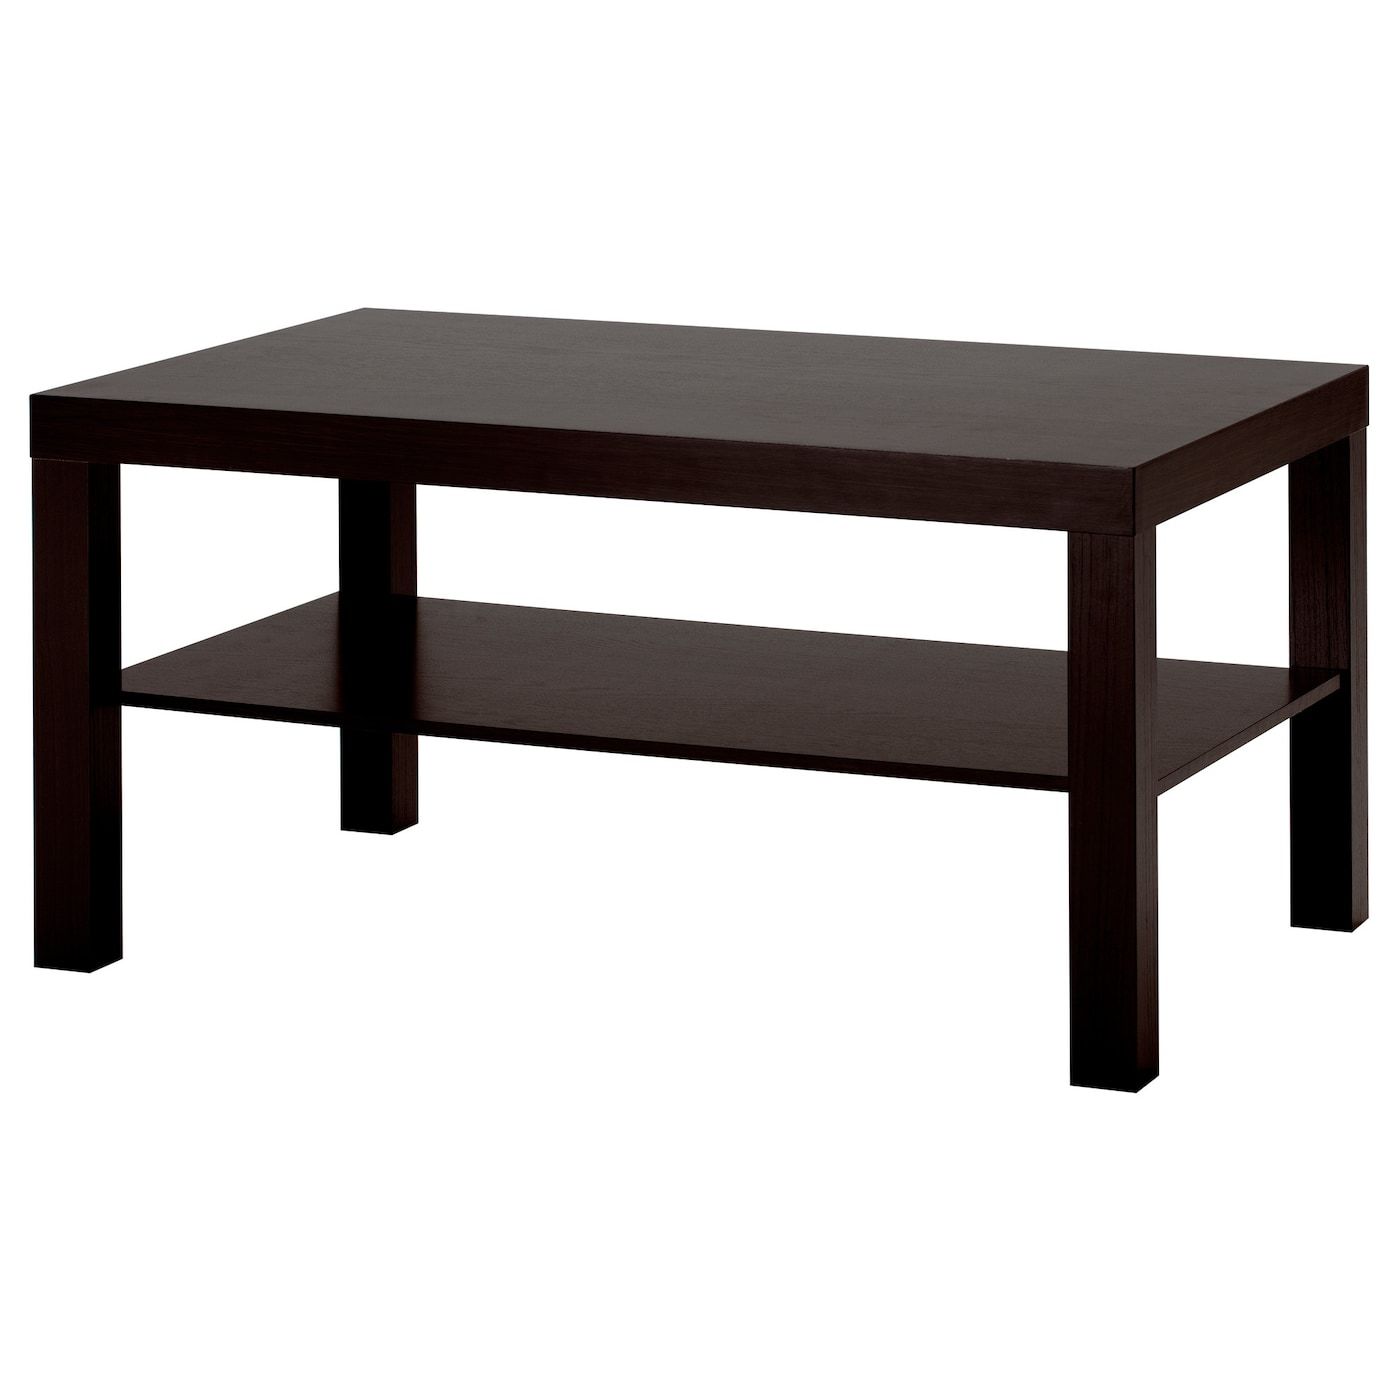 Lack Coffee Table, Black Brown, 35 3/8X21 5/8" – Ikea With White T Base Seminar Coffee Tables (View 12 of 15)